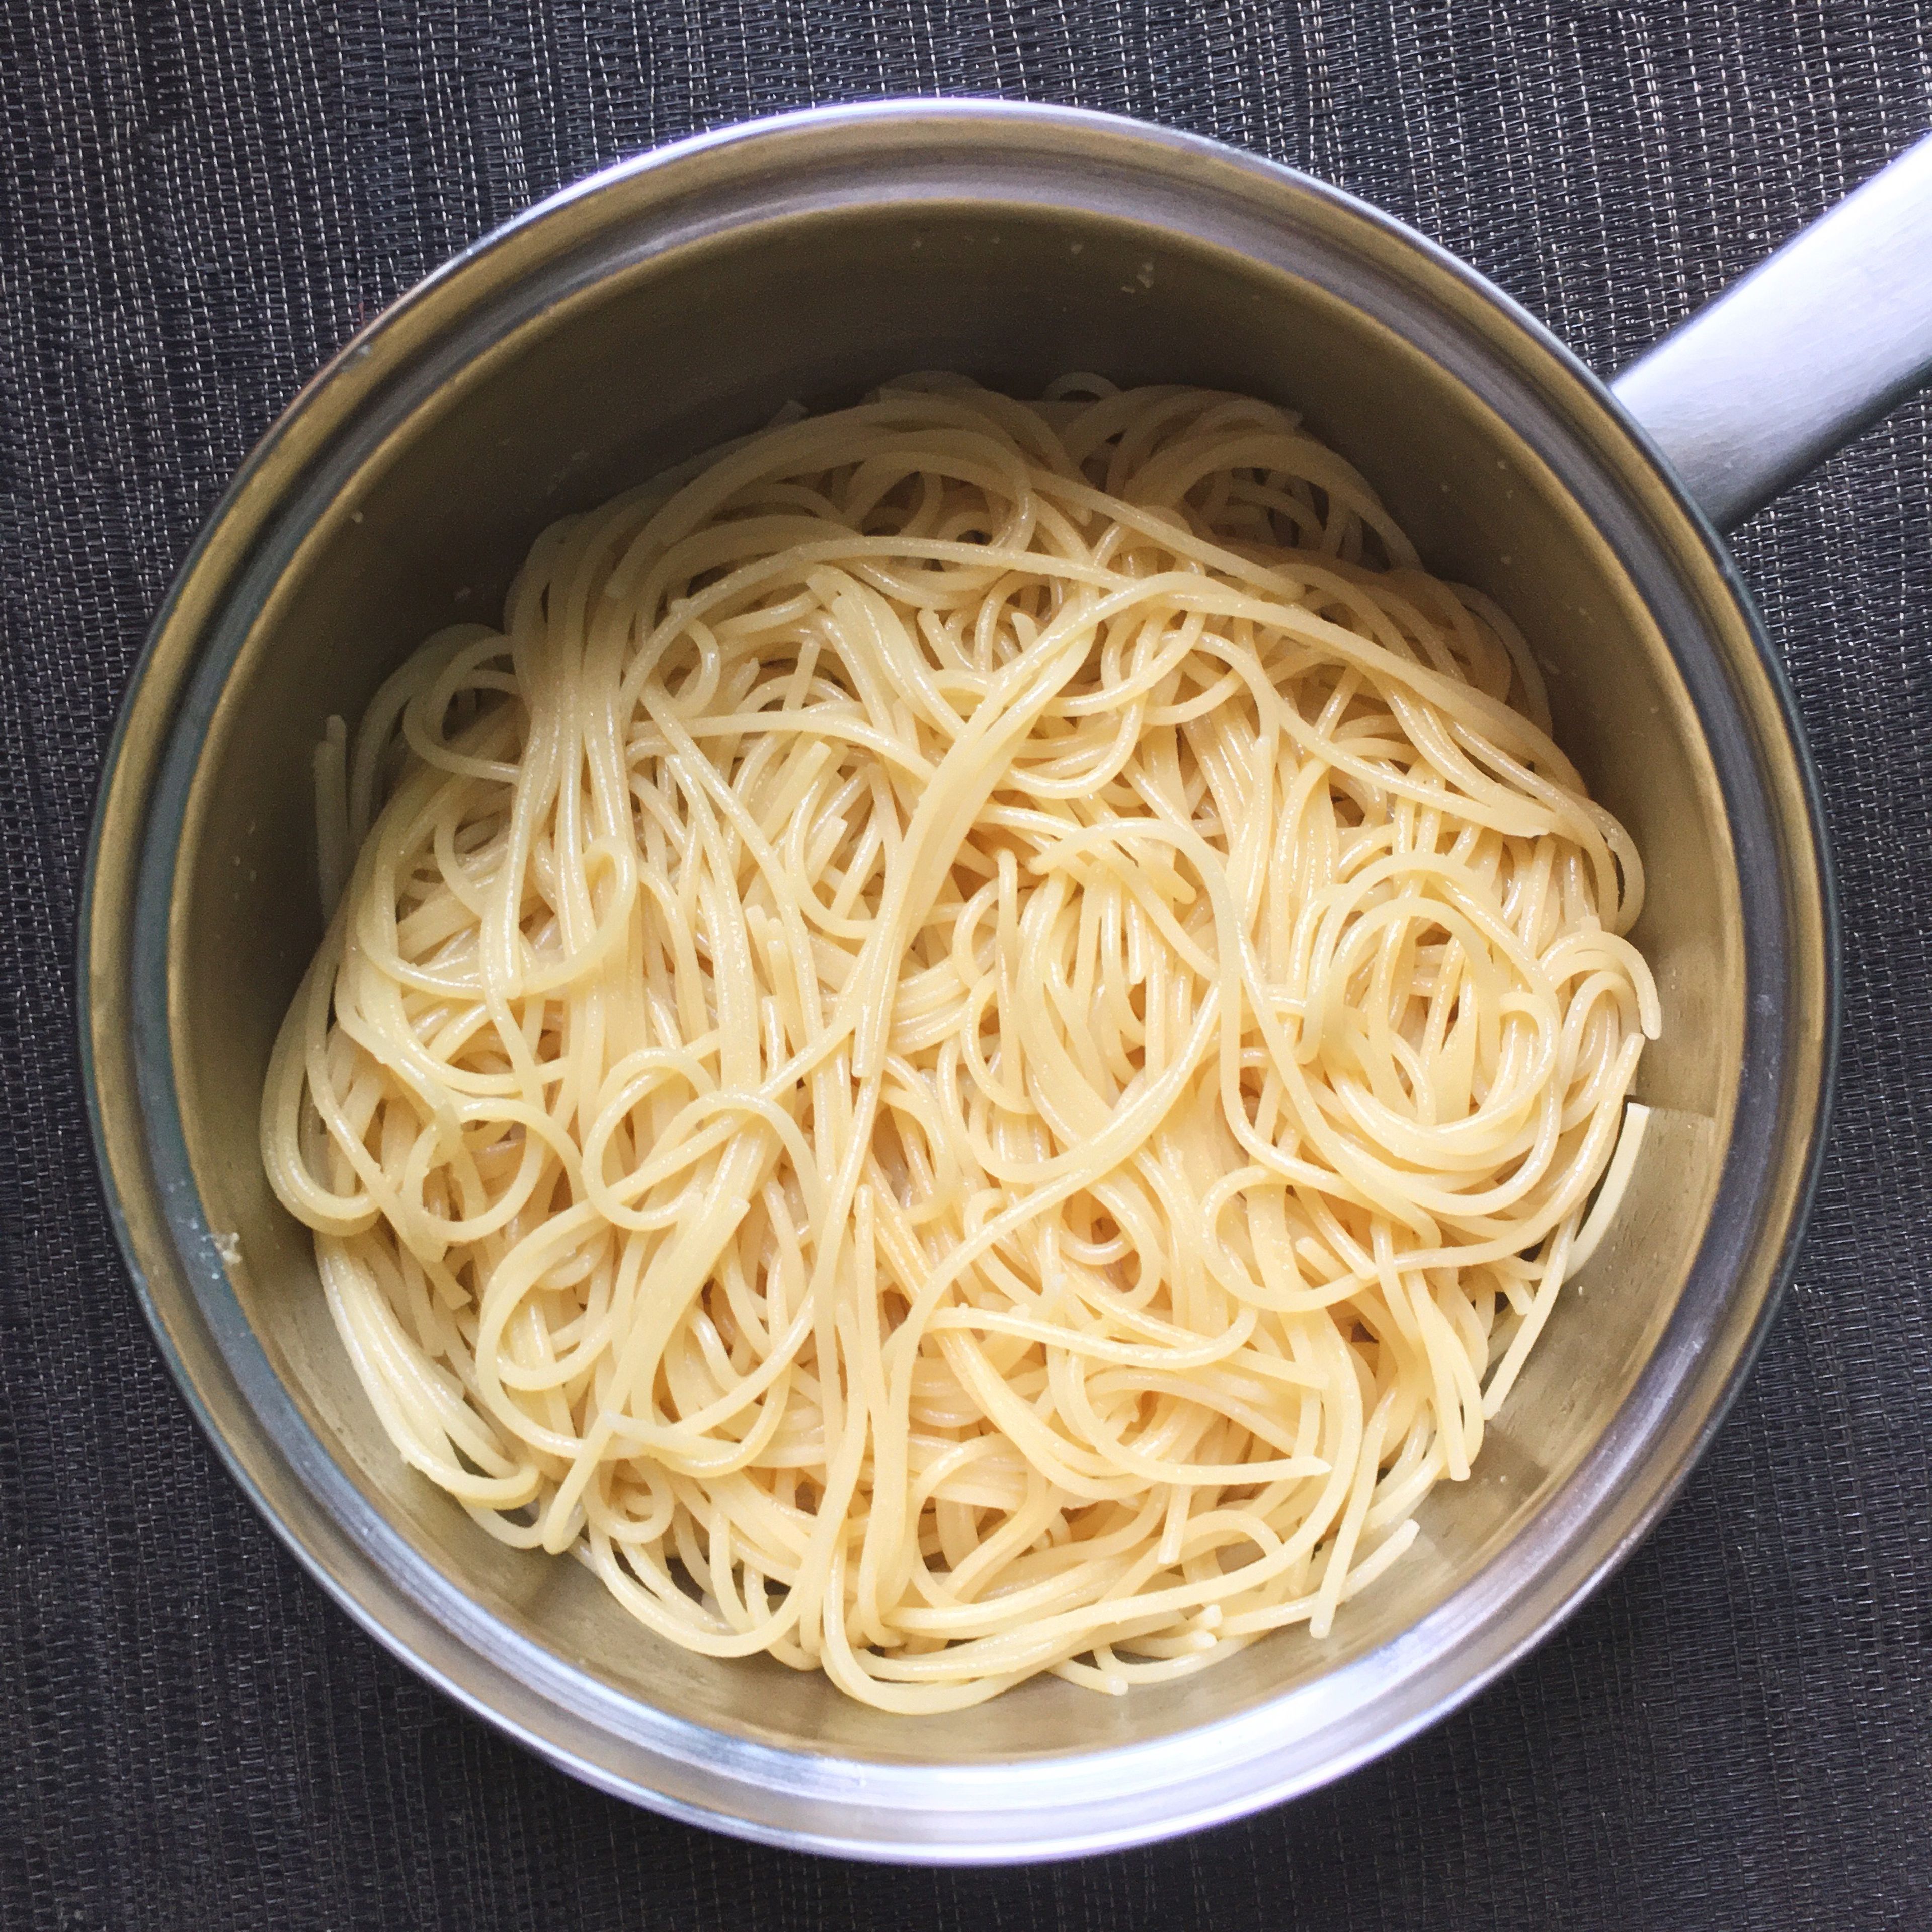 Cook pasta according to instructions or until al dente.